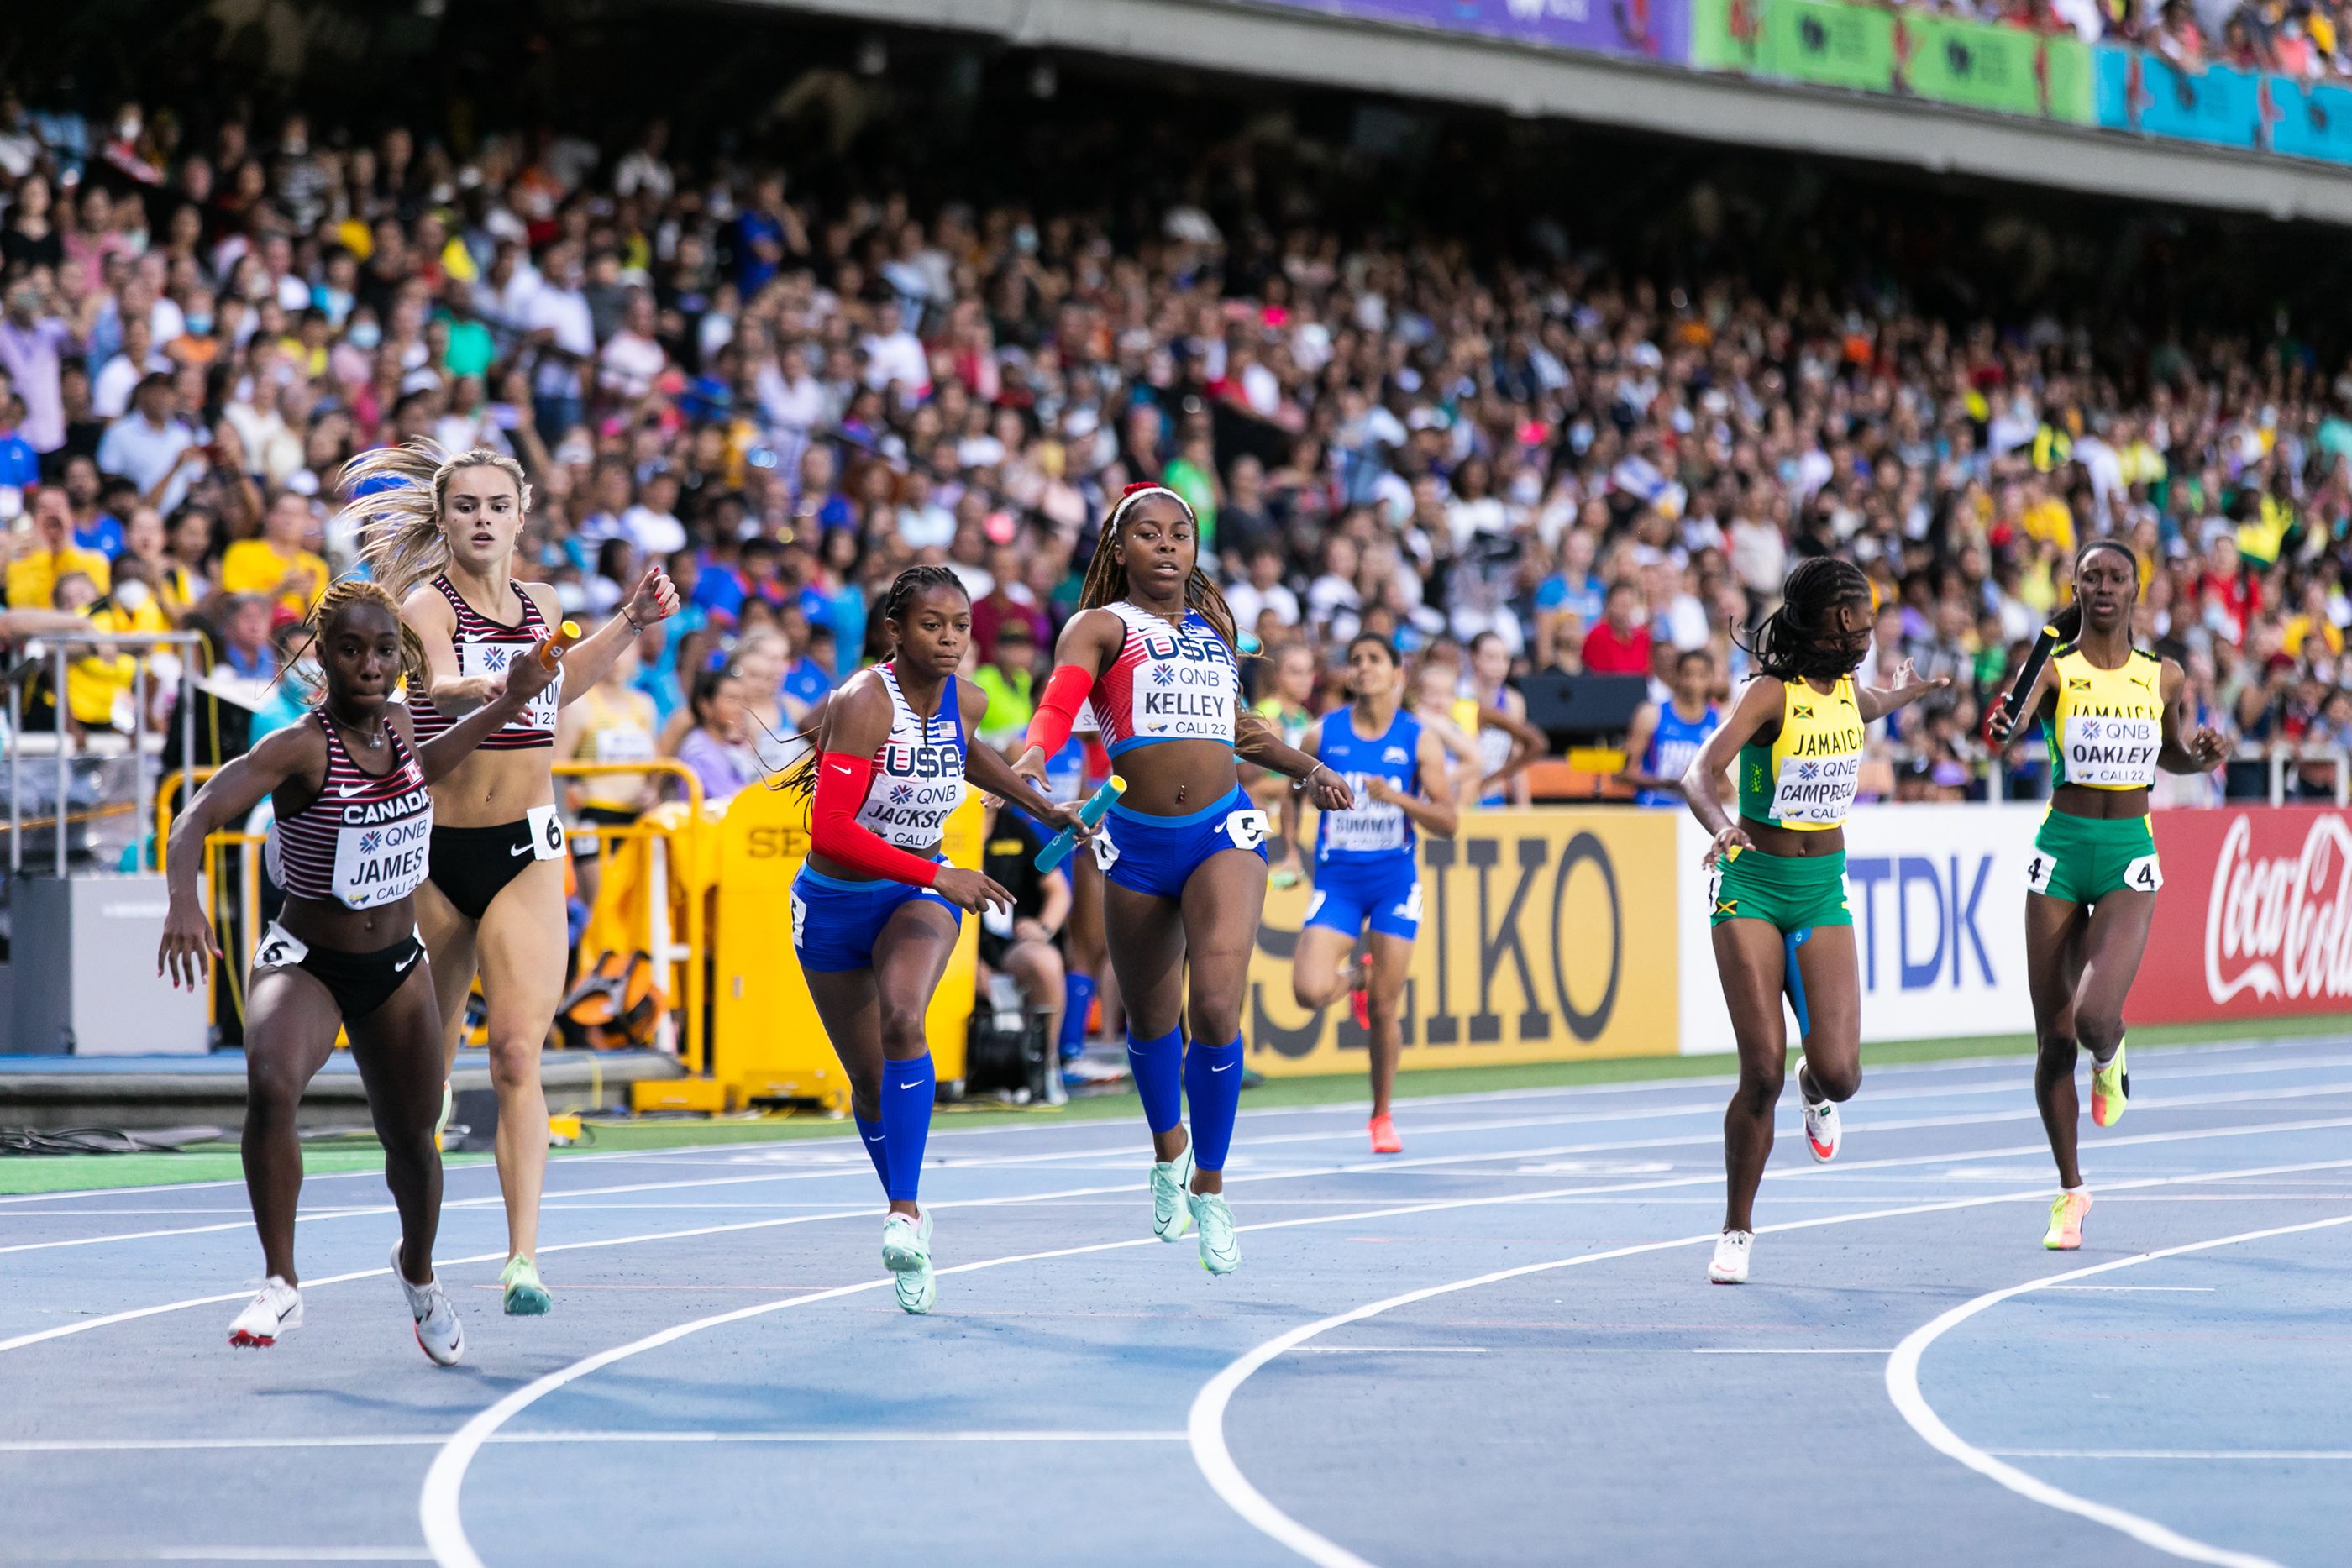 Athletes compete in the women's 4x400m final at the World Athletics U20 Championships in Cali